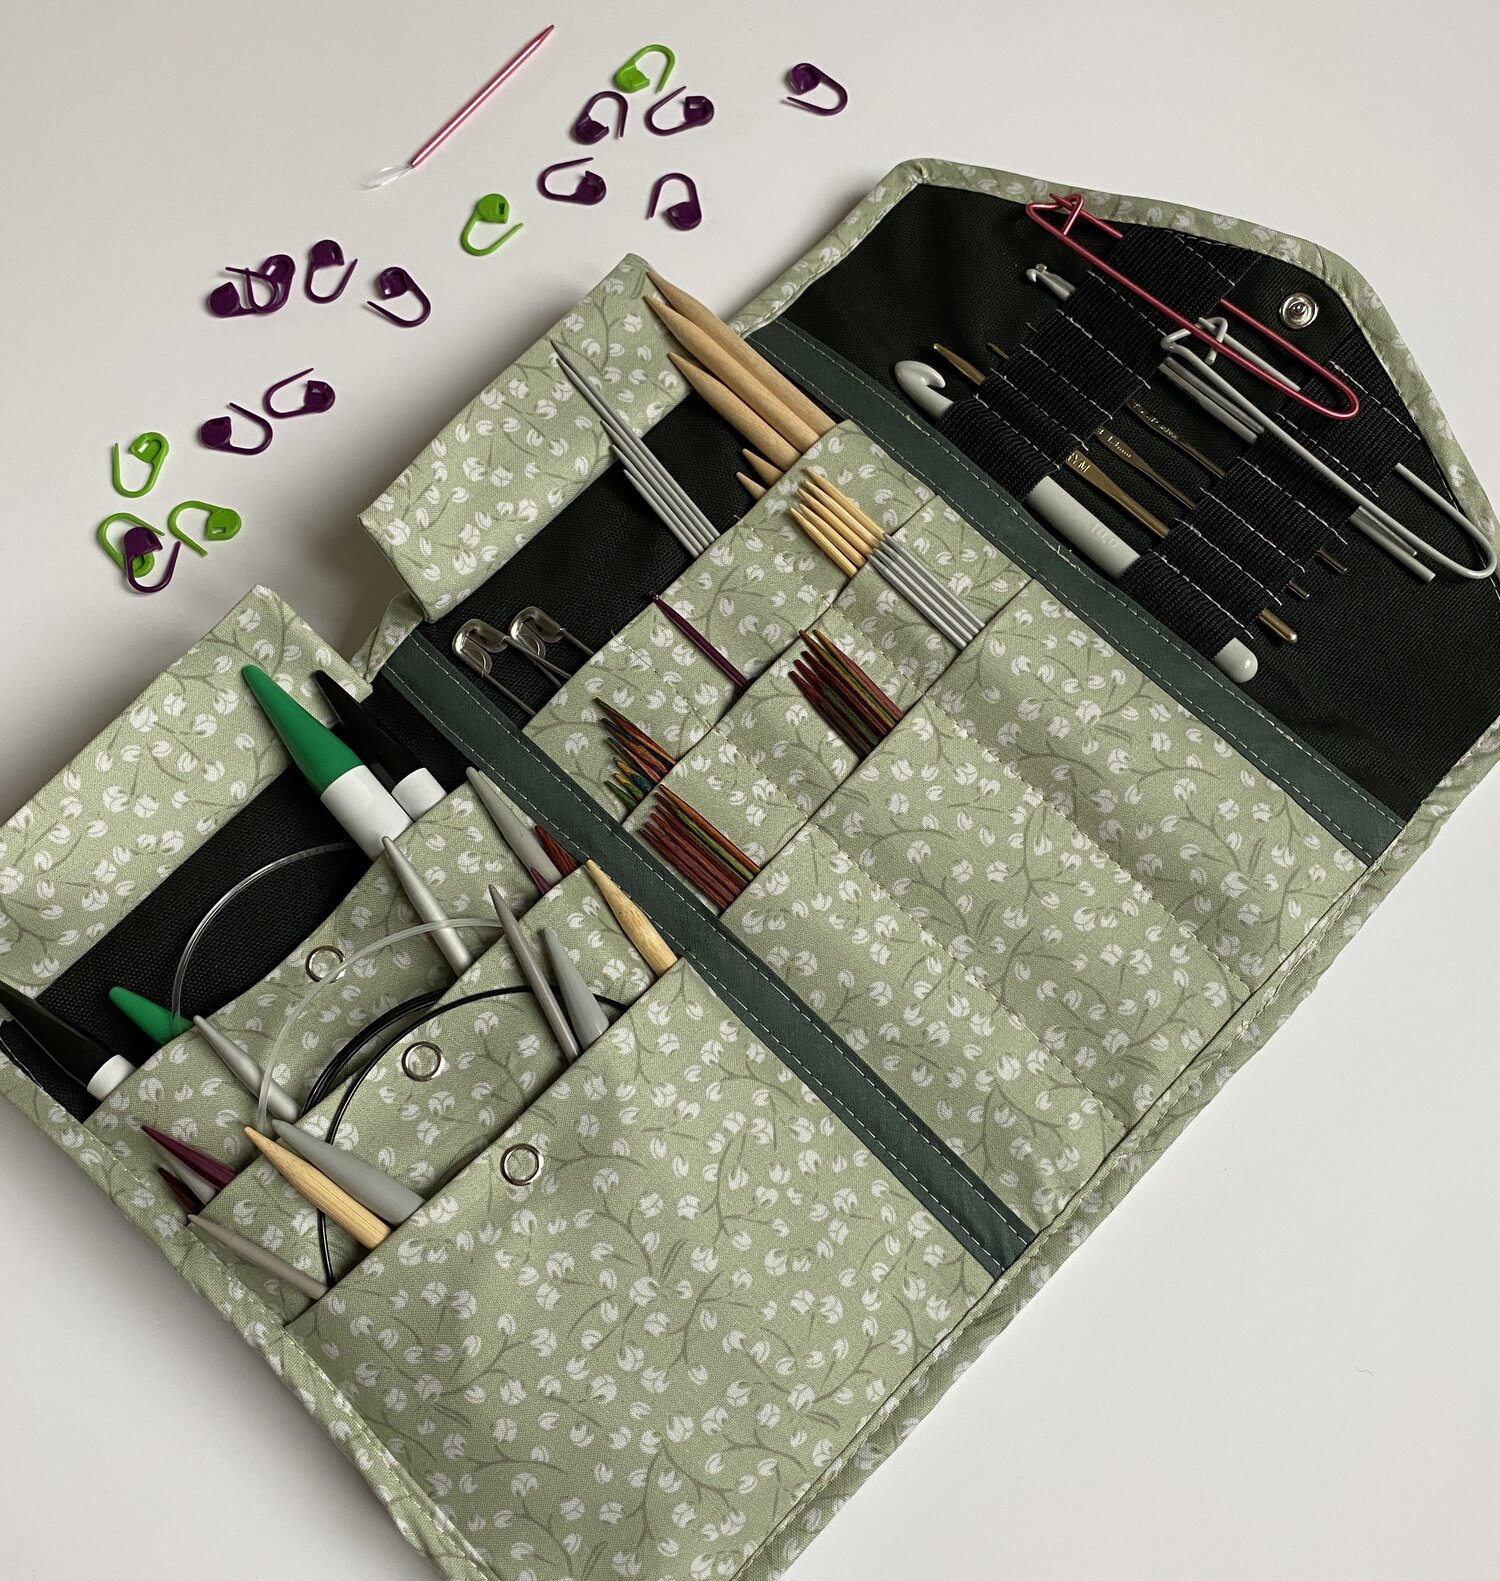 Interchangeable Knitting Needle Case // Tutorial - Confessions of